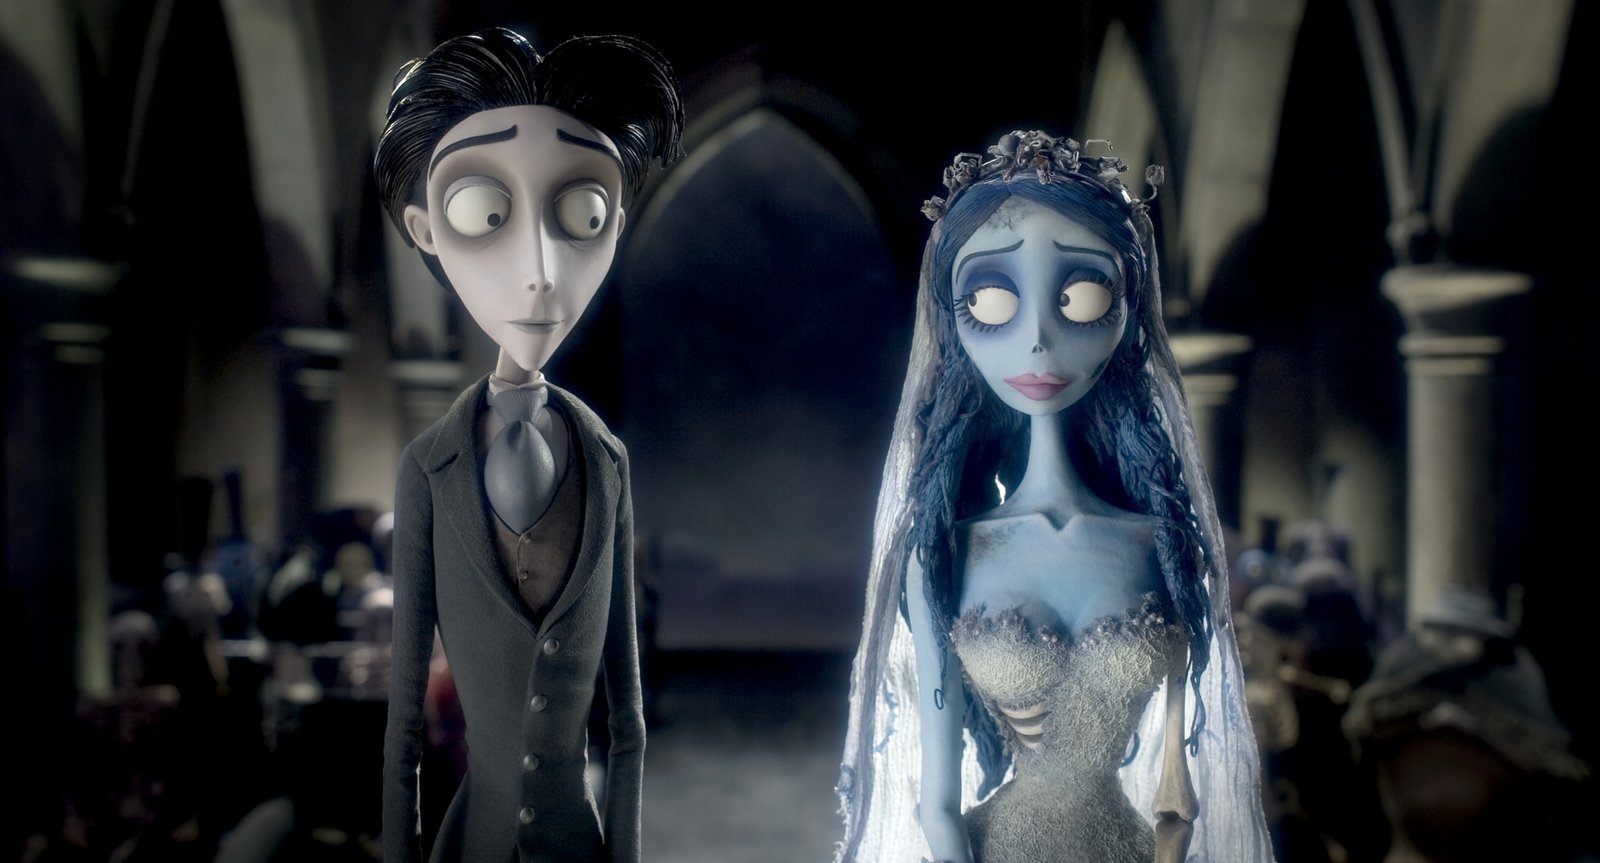 Movies Like Howl’s Moving Castle - Corpse Bride